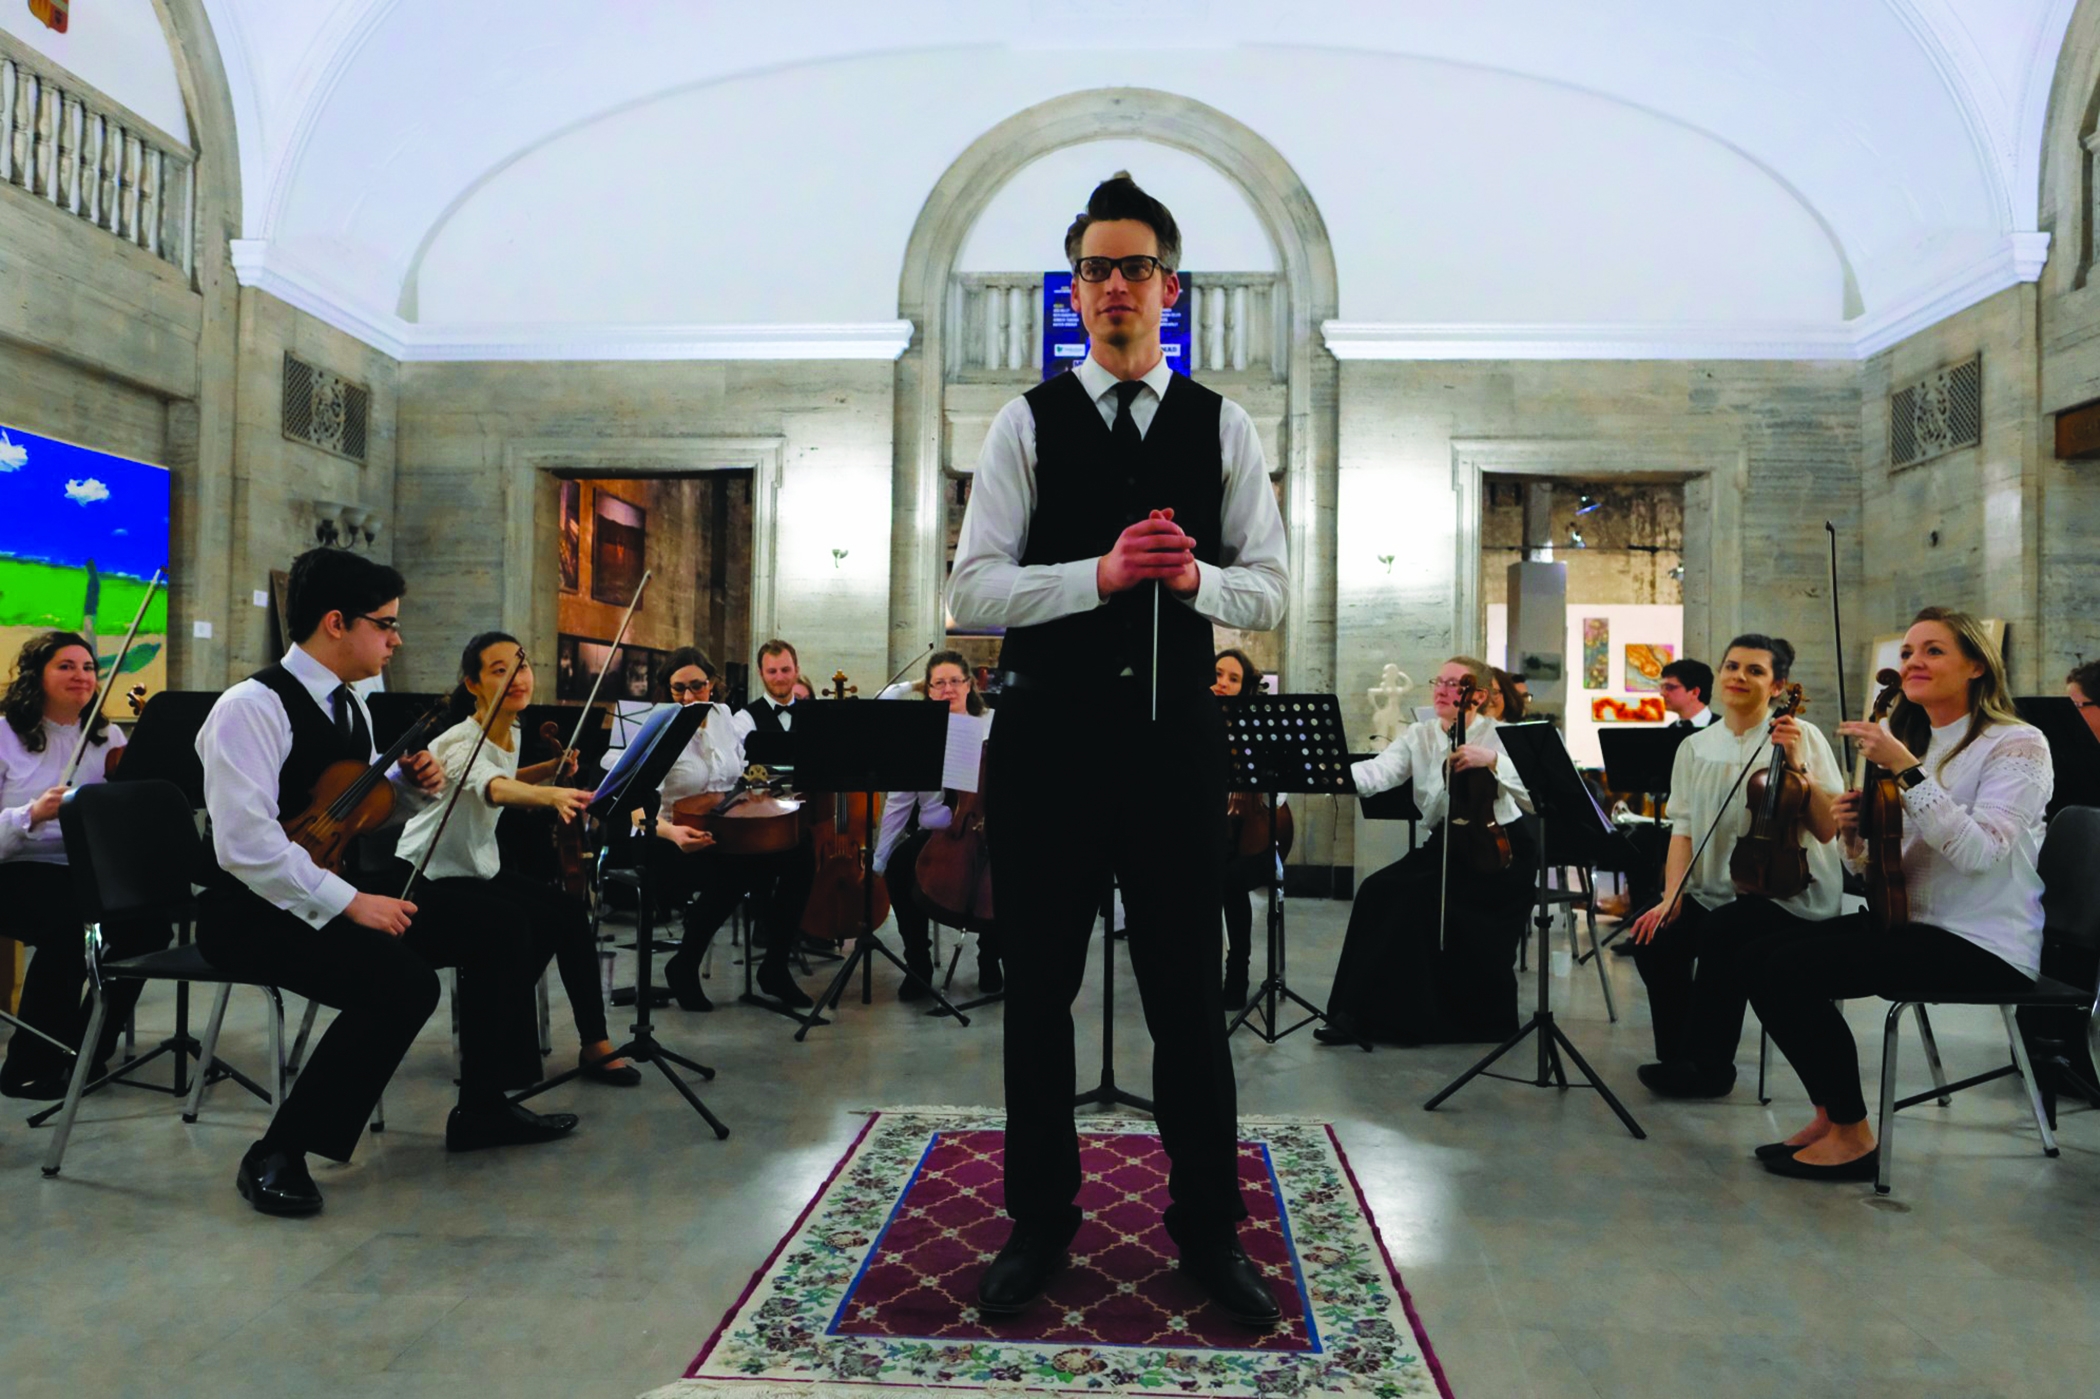 Orchestral Odyssey: Vintage Parlor Orchestra rethinks  the live classical experience